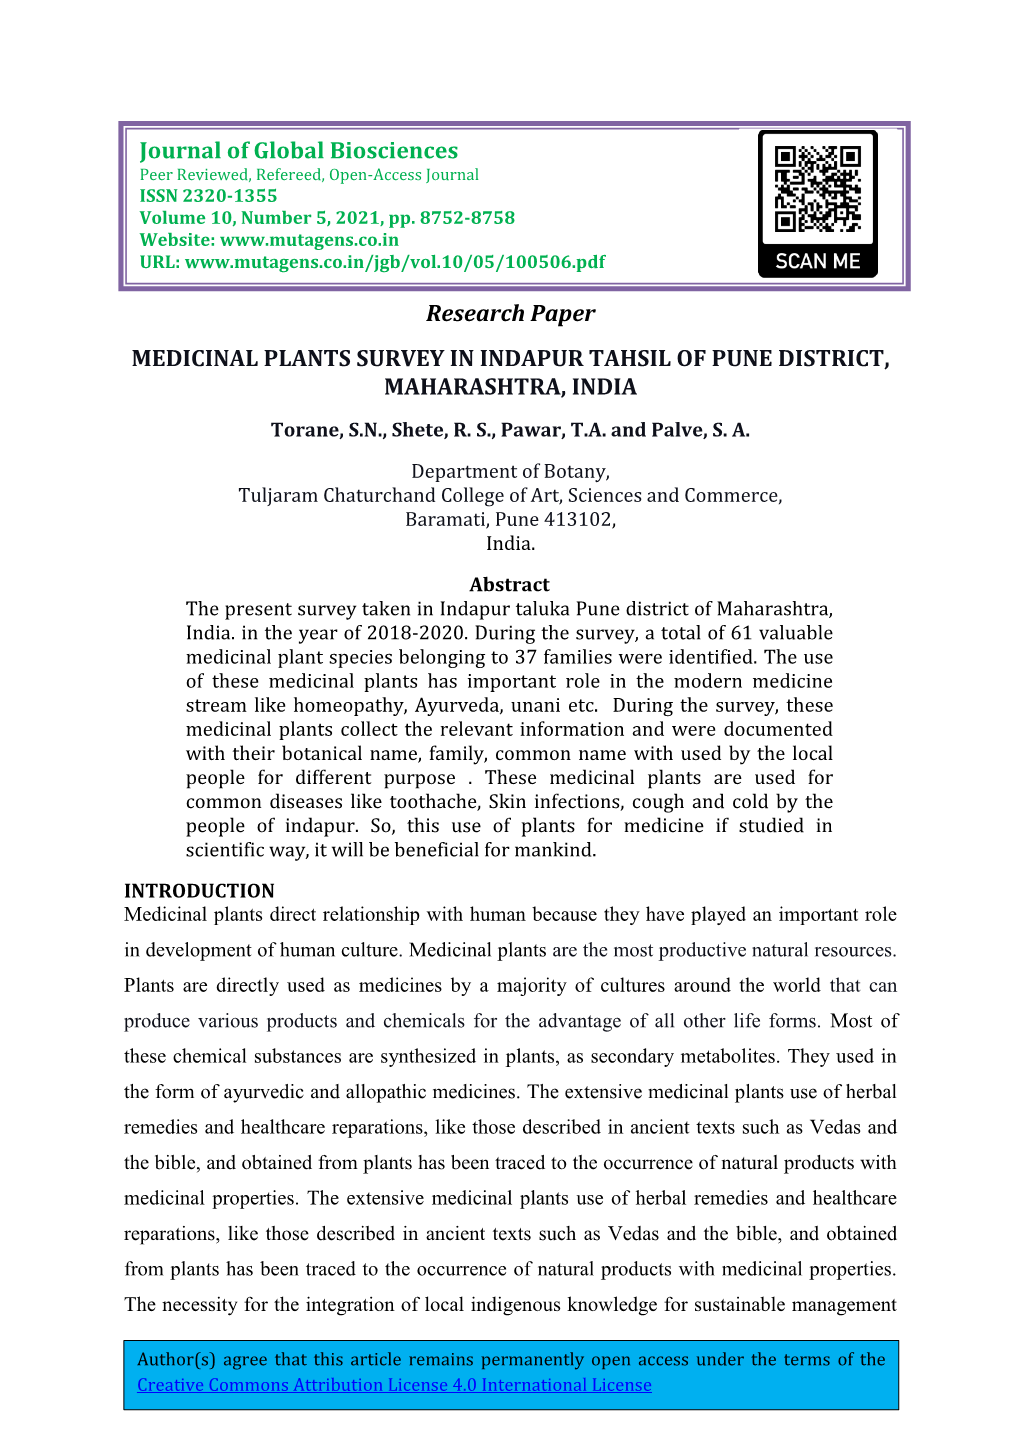 Research Paper MEDICINAL PLANTS SURVEY in INDAPUR TAHSIL of PUNE DISTRICT, MAHARASHTRA, INDIA Journal of Global Biosciences